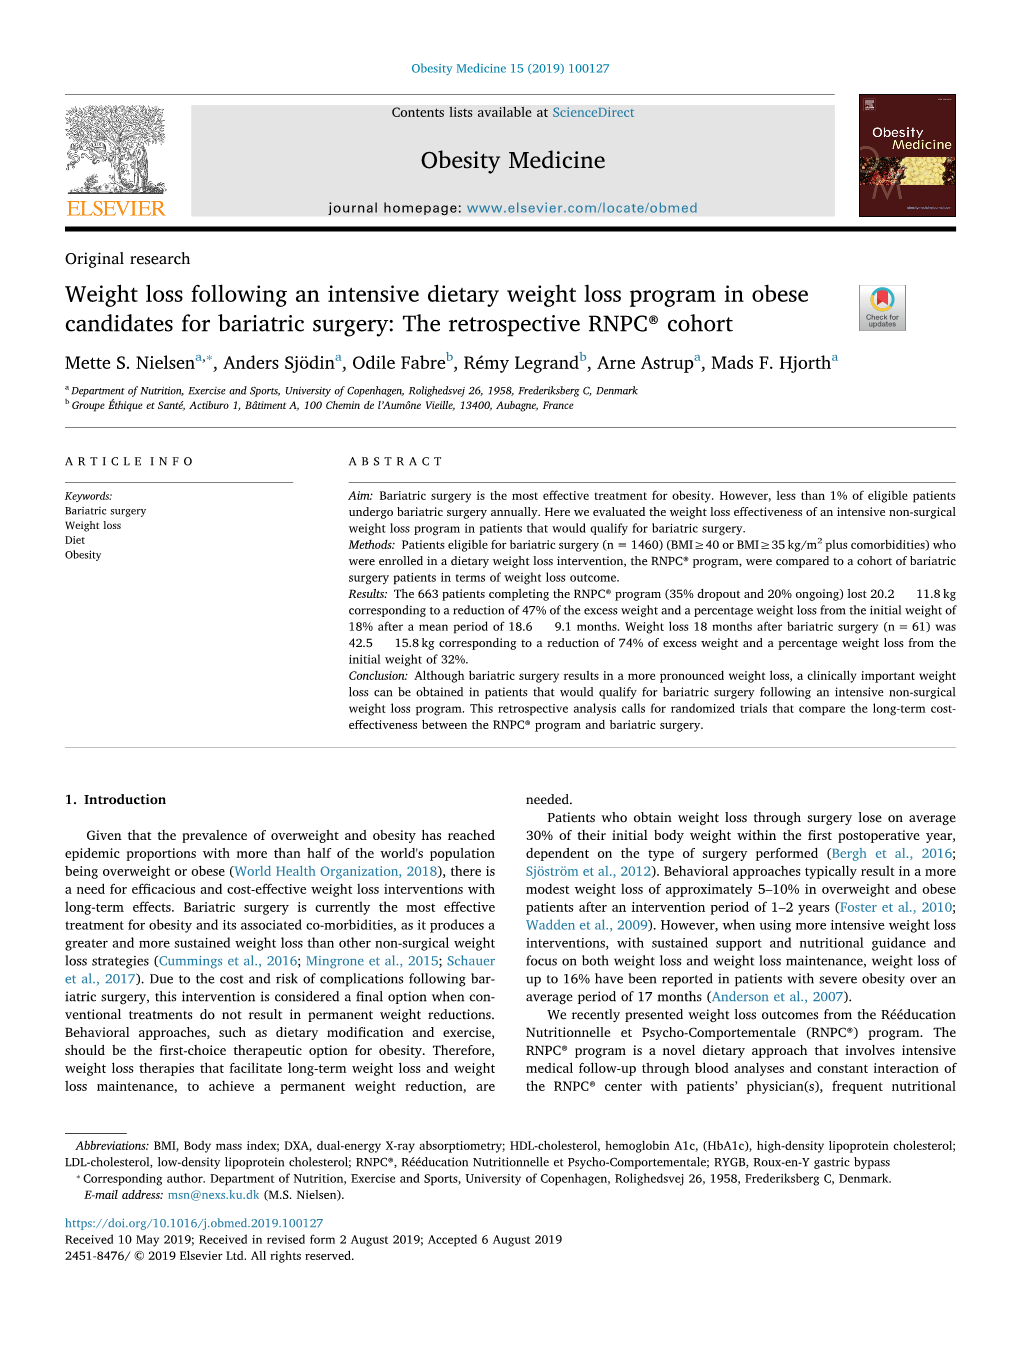 Weight Loss Following an Intensive Dietary Weight Loss Program in Obese Candidates for Bariatric Surgery: the Retrospective RNPC® Cohort T